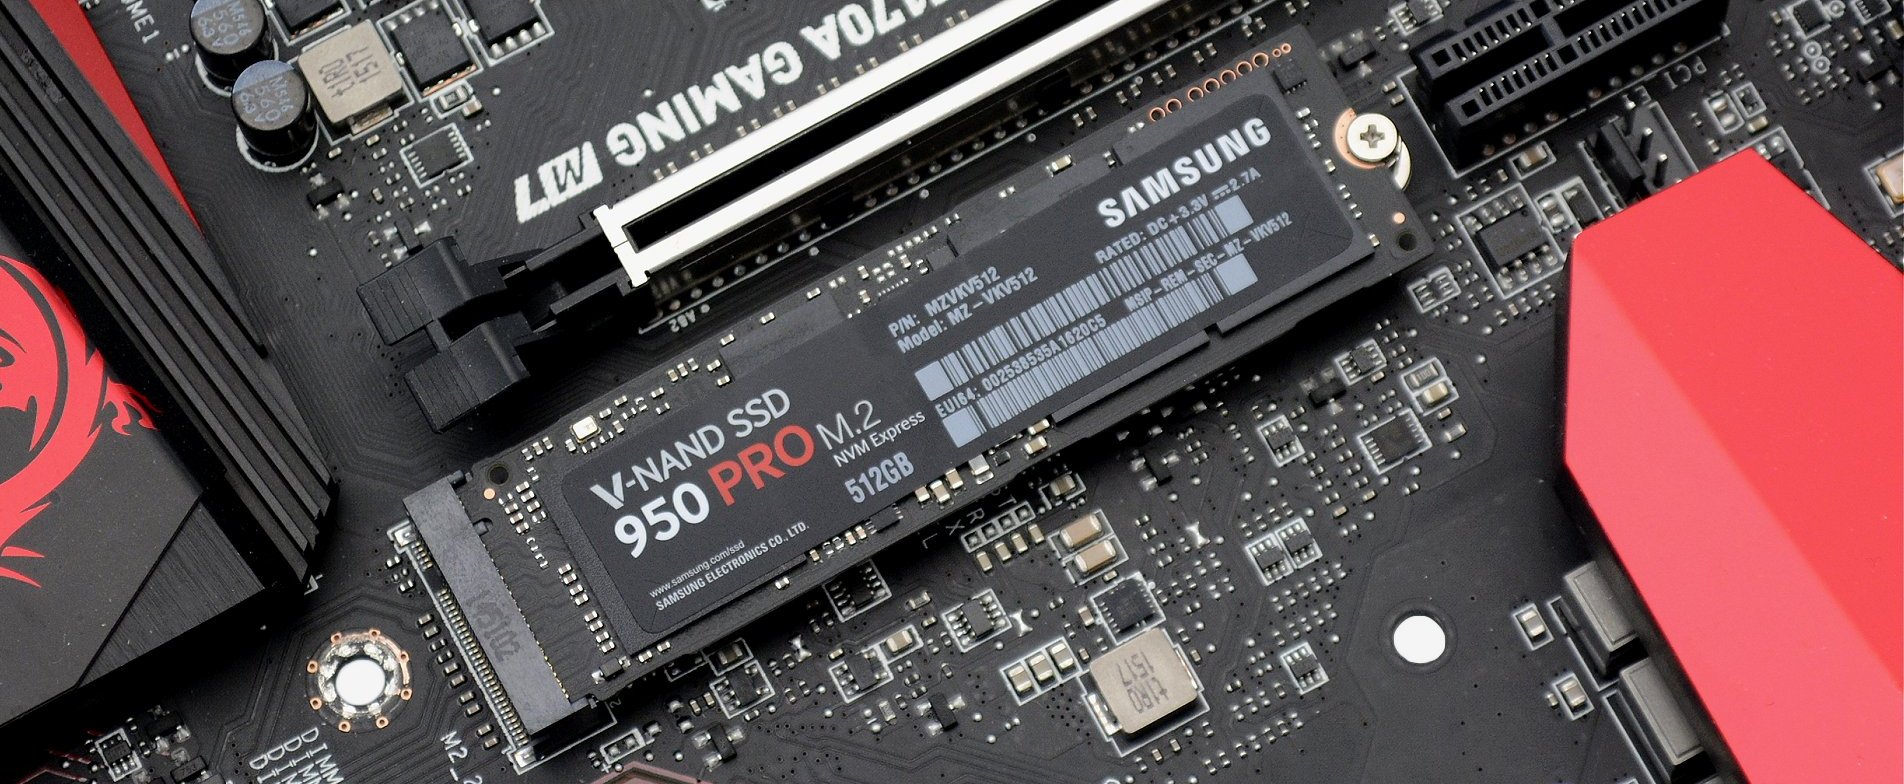 sufficient amateur Fly kite Samsung SSD 950 Pro 512GB PCIe Review | TechSpot